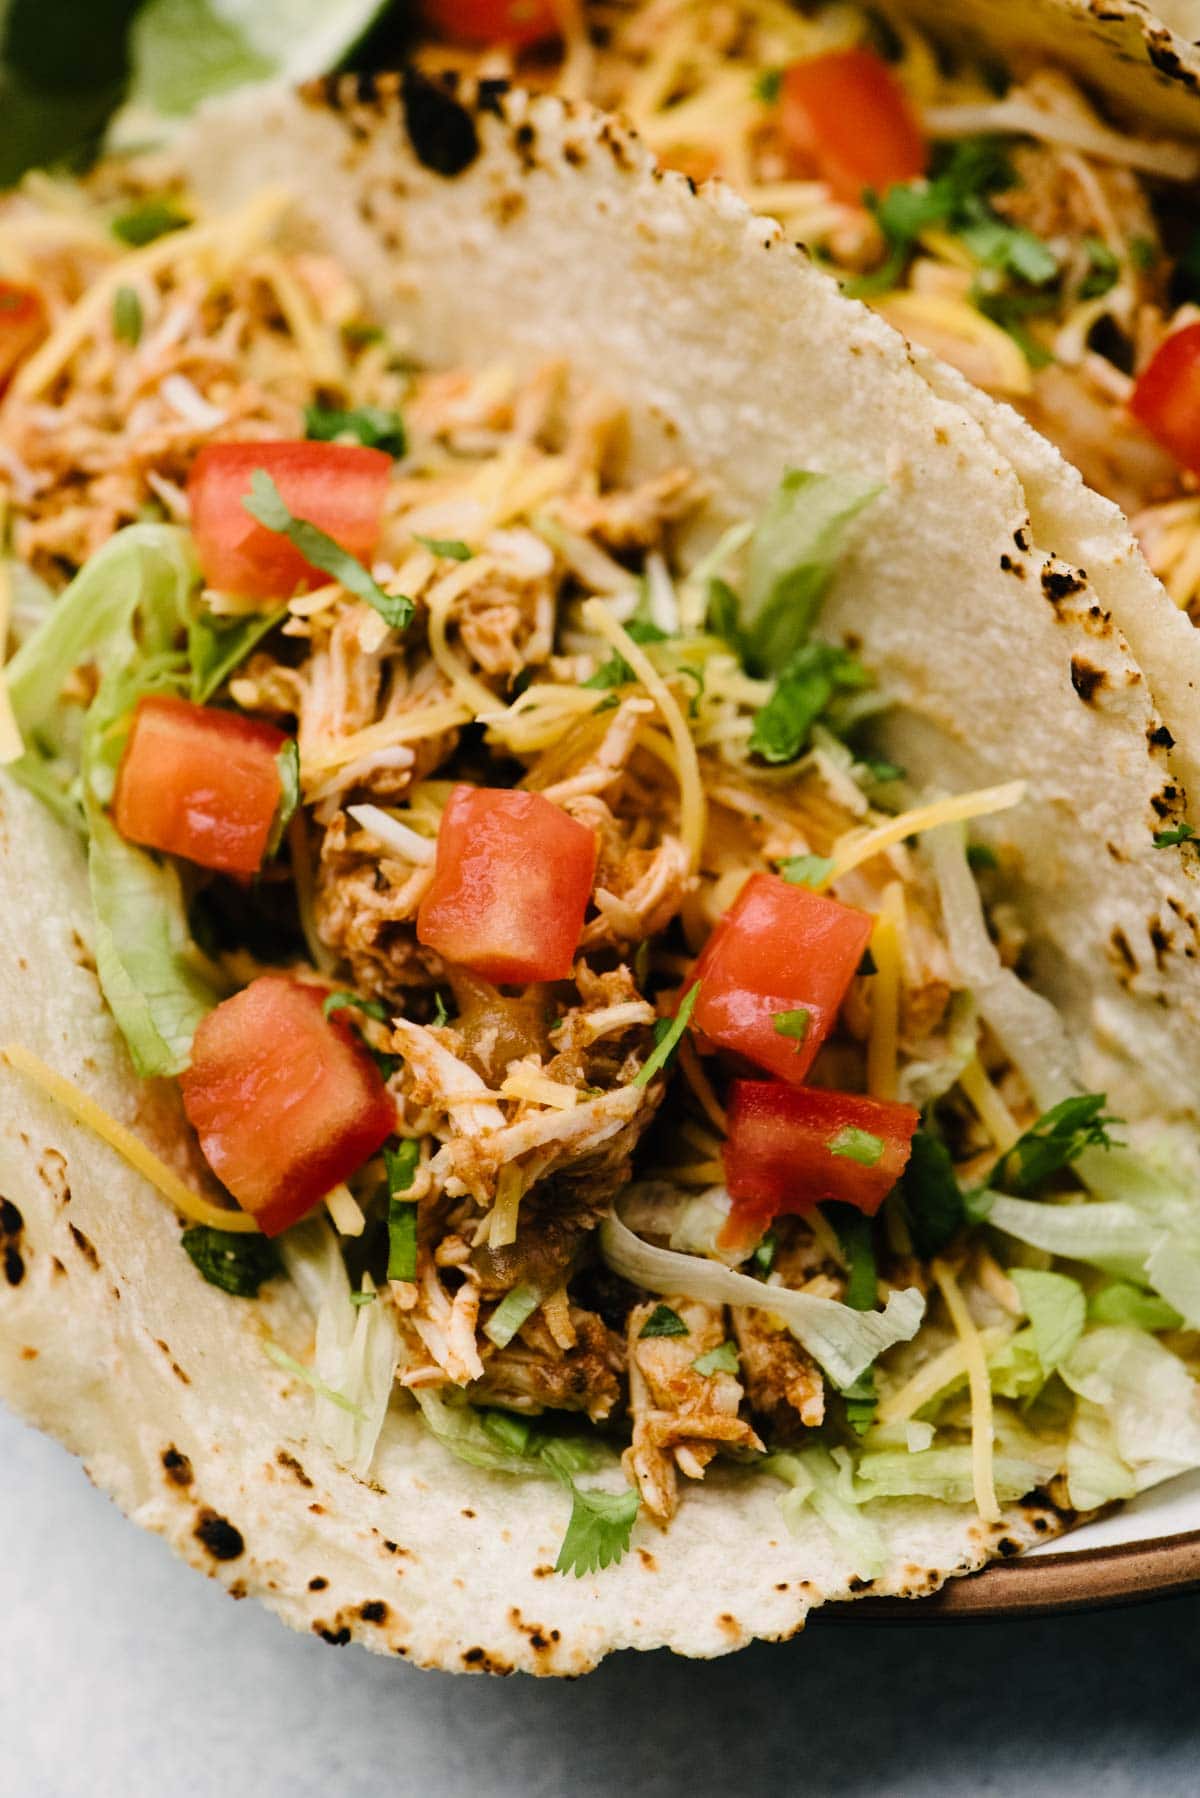 Side view, a crockpot chicken taco on a plate, topped with lettuce, tomato, cheese, and cilantro.